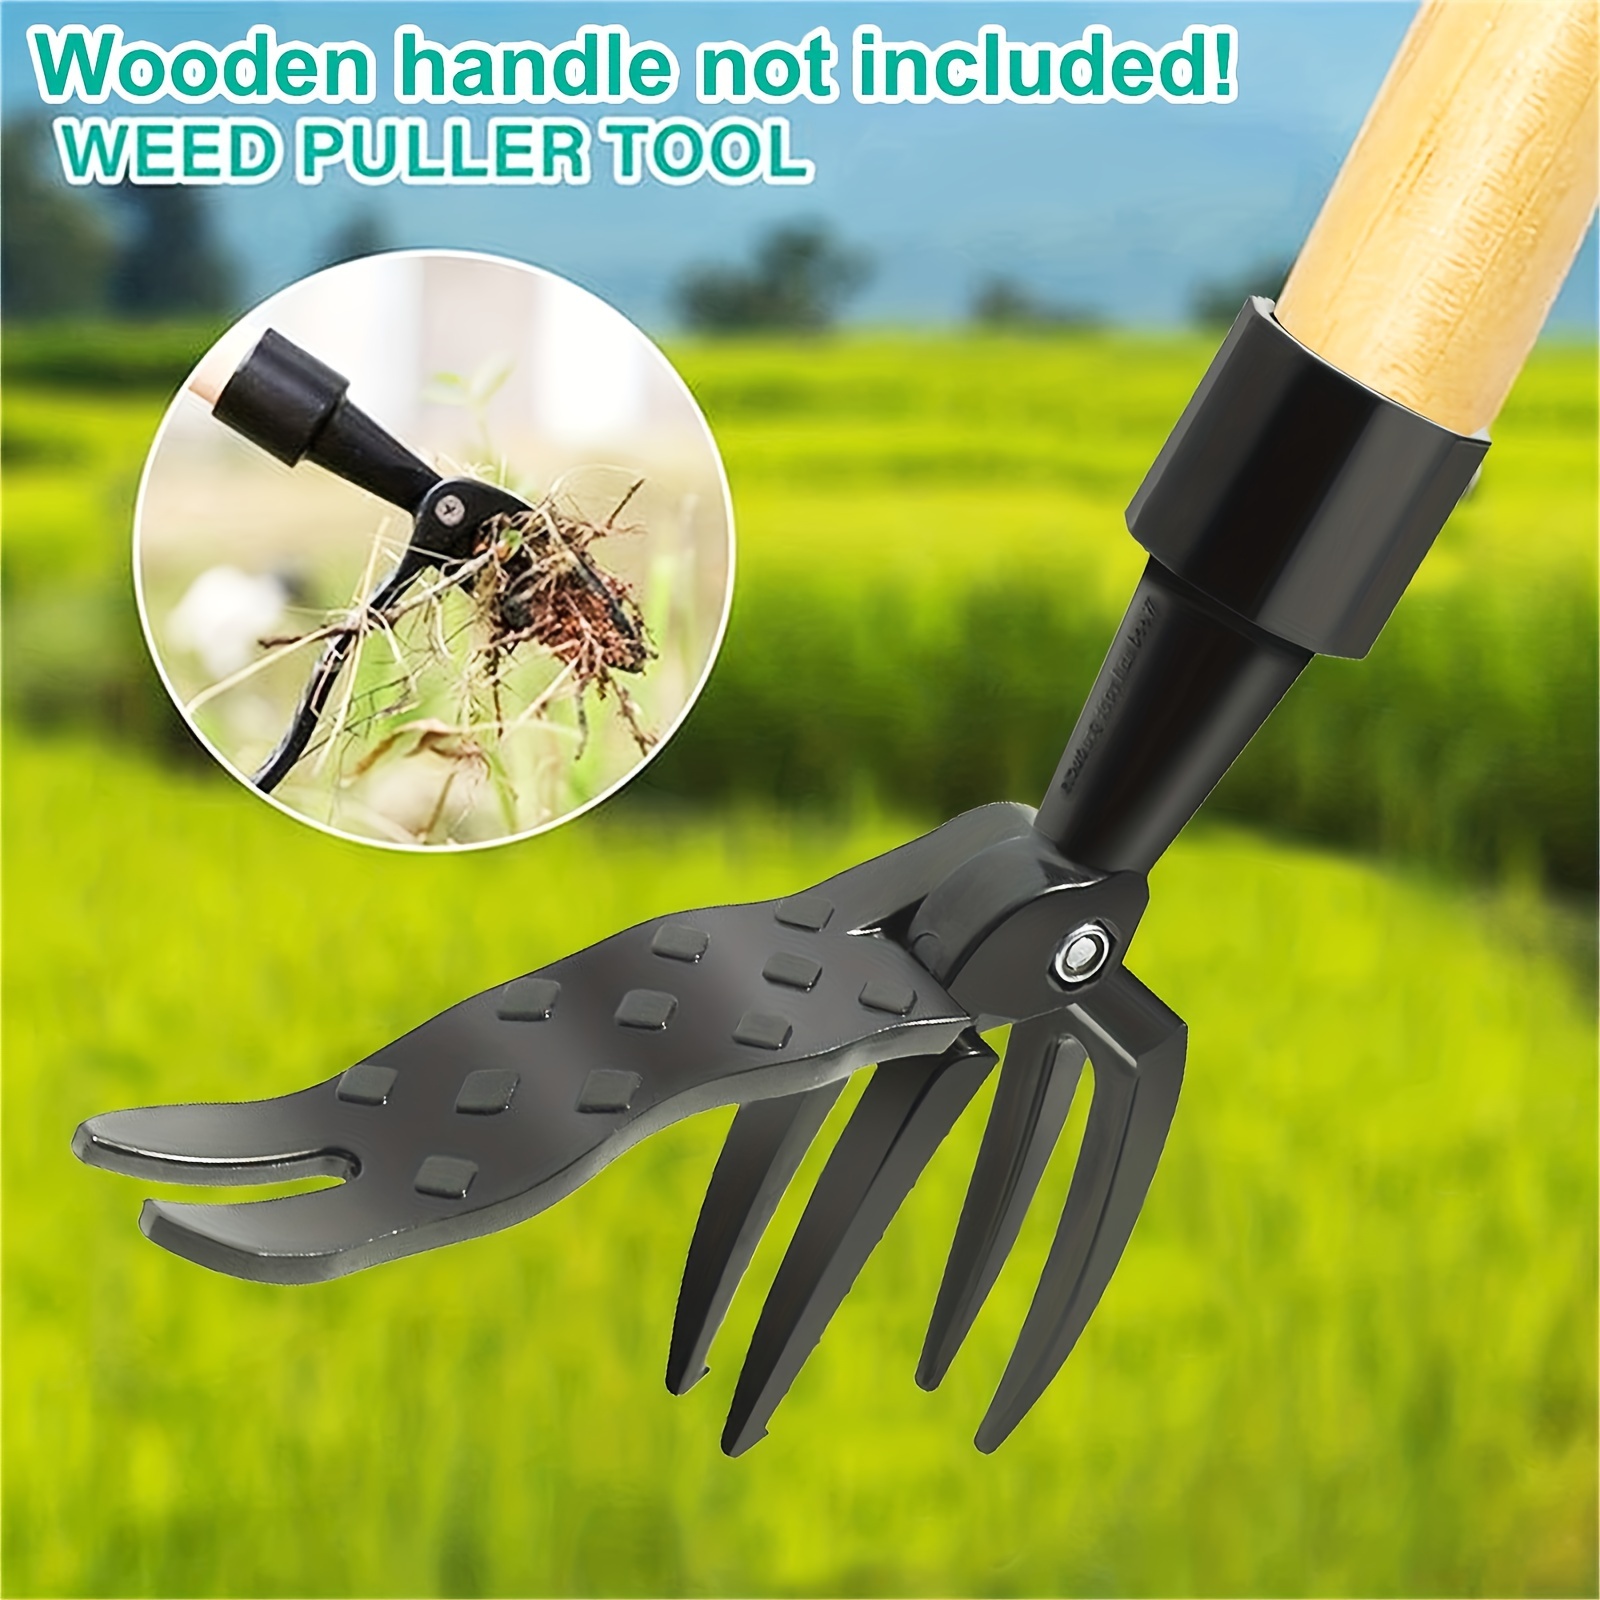 

Ergonomic Puller Tool With Long Handle - Stainless Steel, 4-claw Head For Easy Dandelion & Removal, No Bending Or Kneeling Required